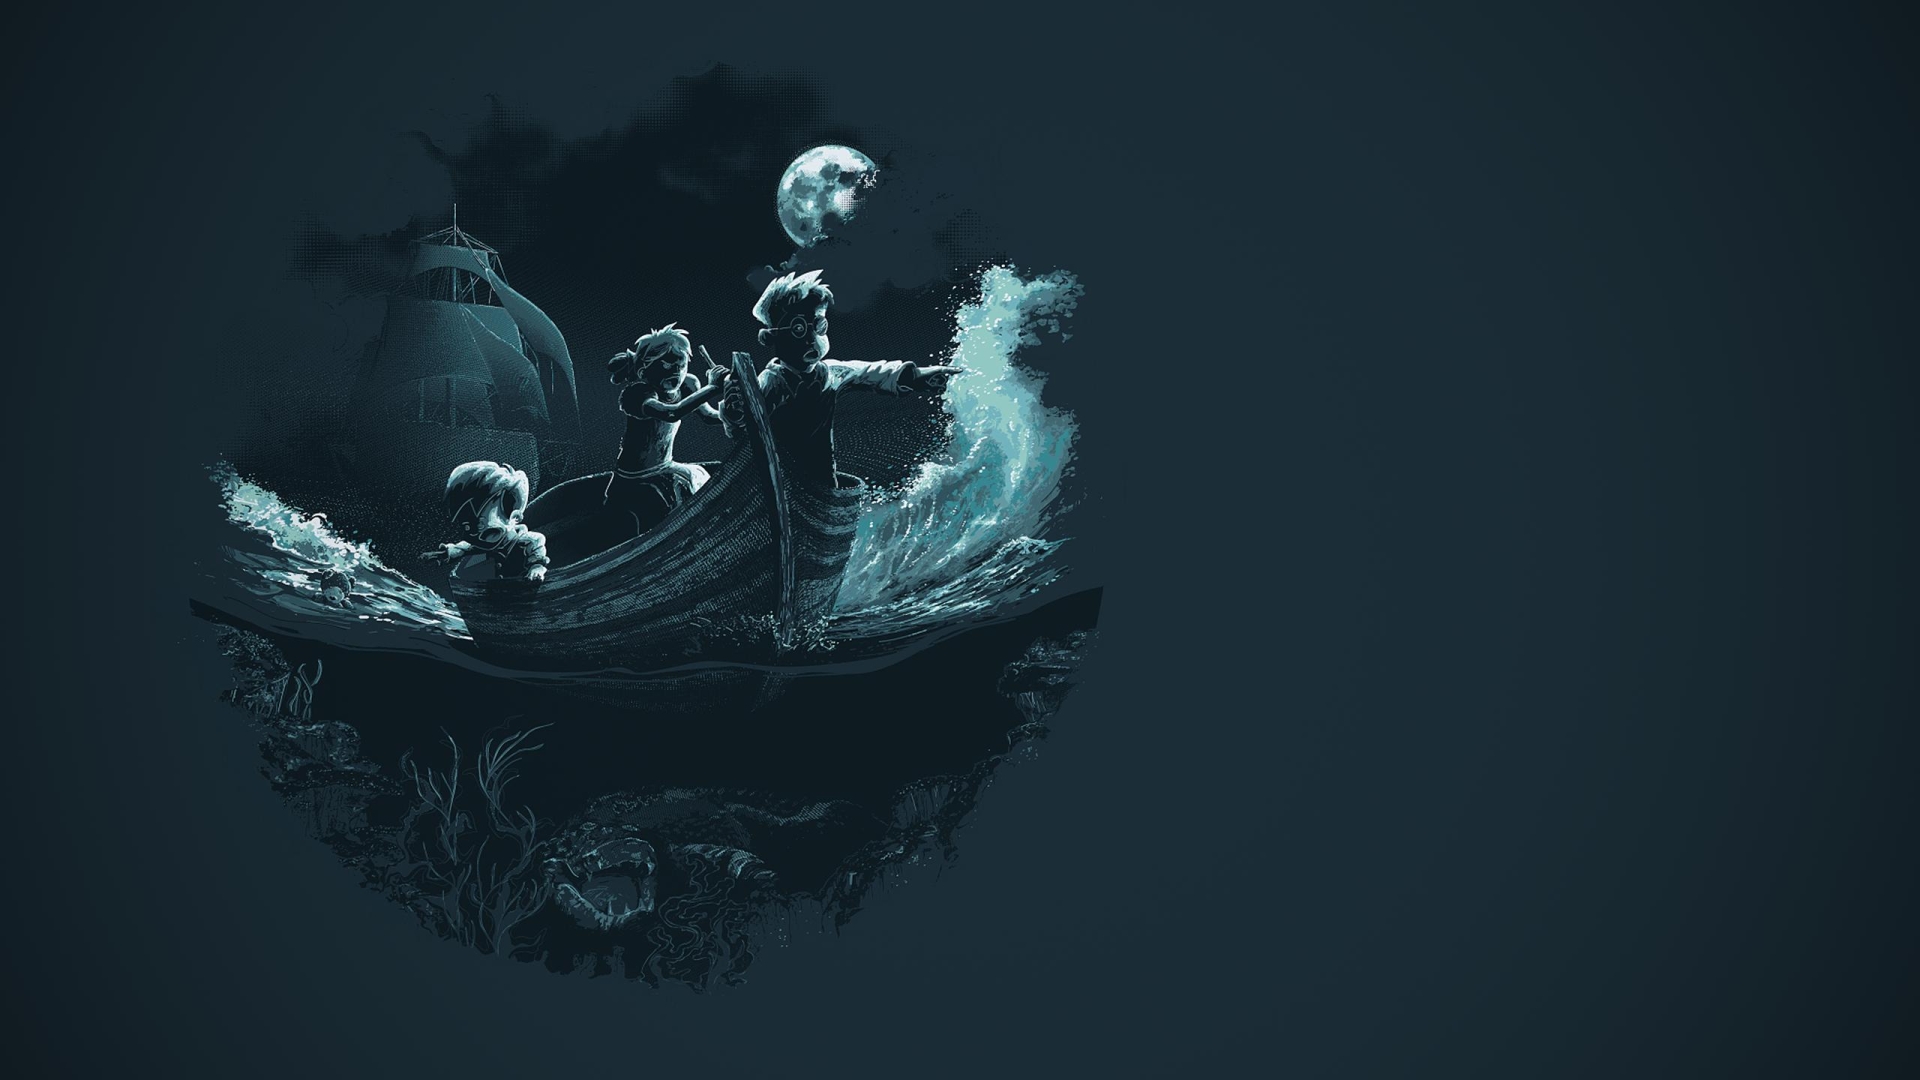 Take Me To Neverland Galaxy Wallpaper From